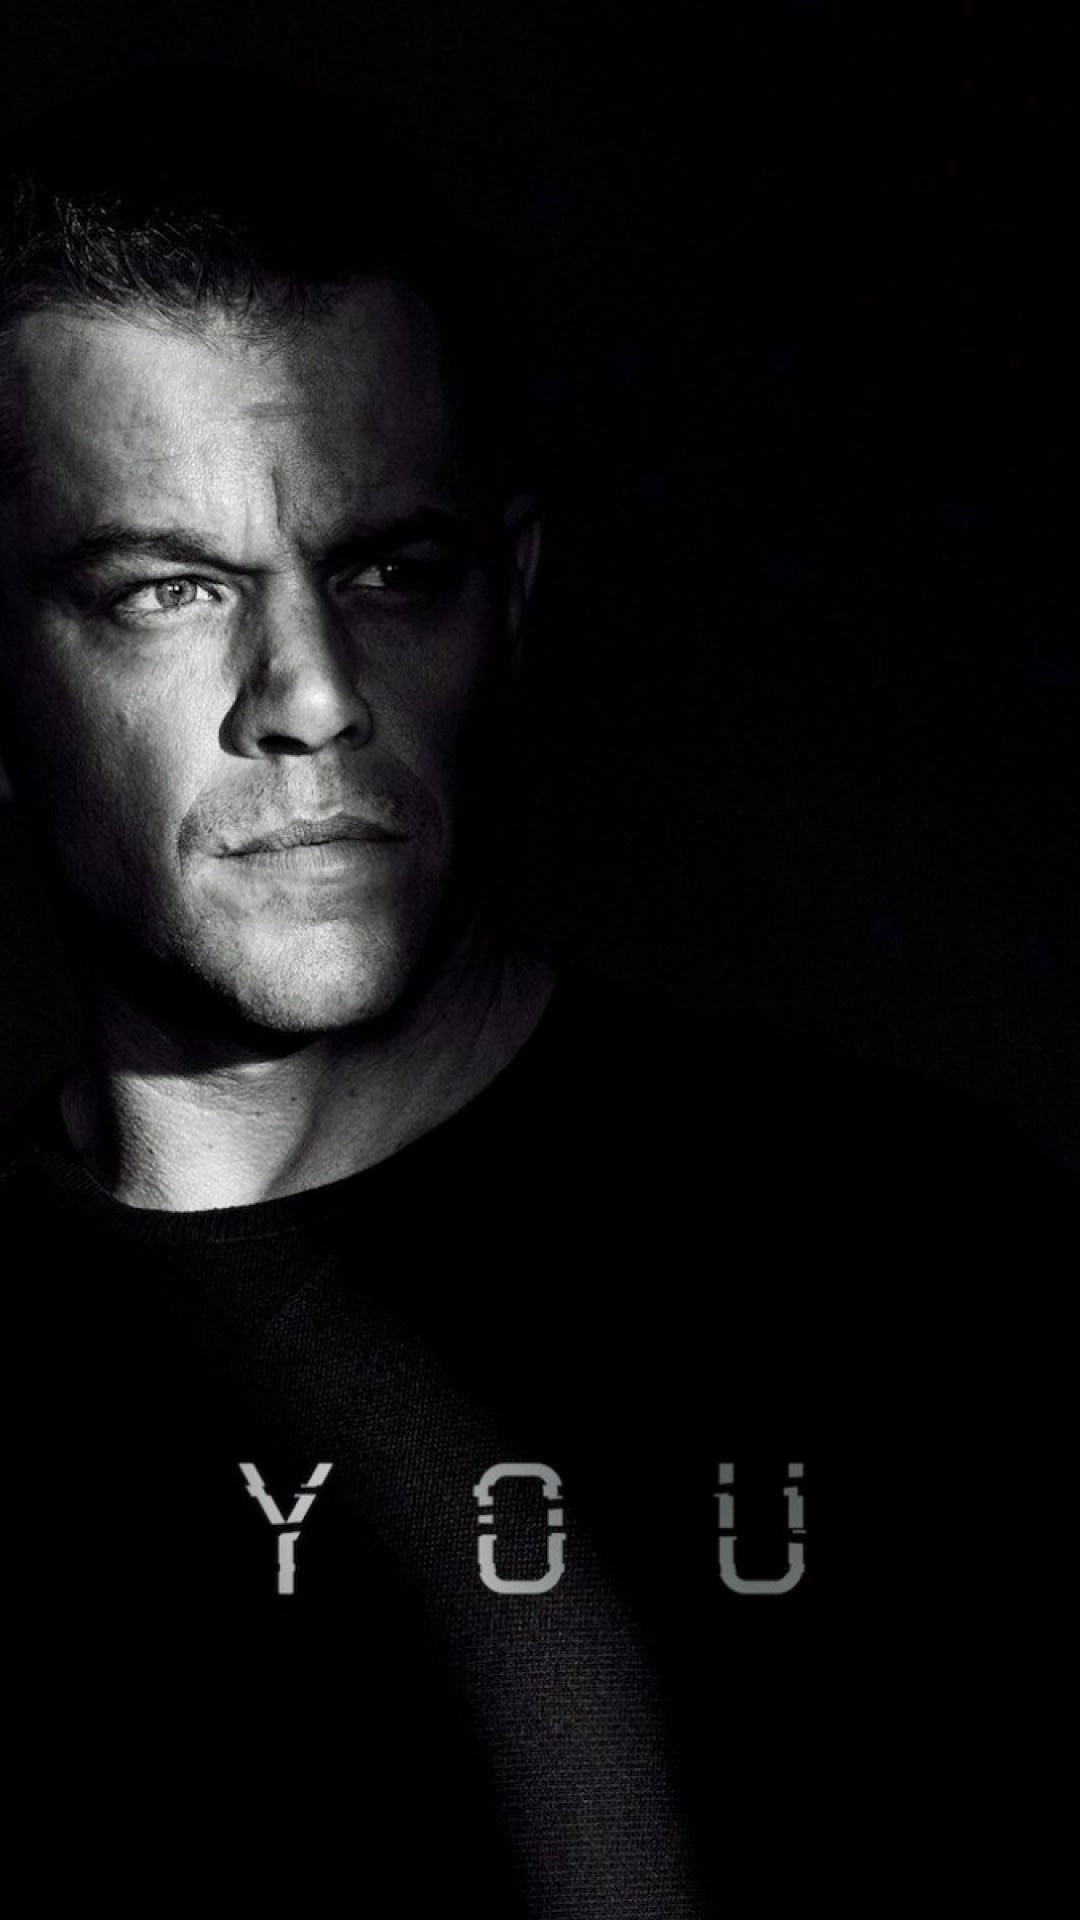 Jason Bourne, Spy Thriller, Wallpaper Collection, Mobile Devices, 1080x1920 Full HD Phone